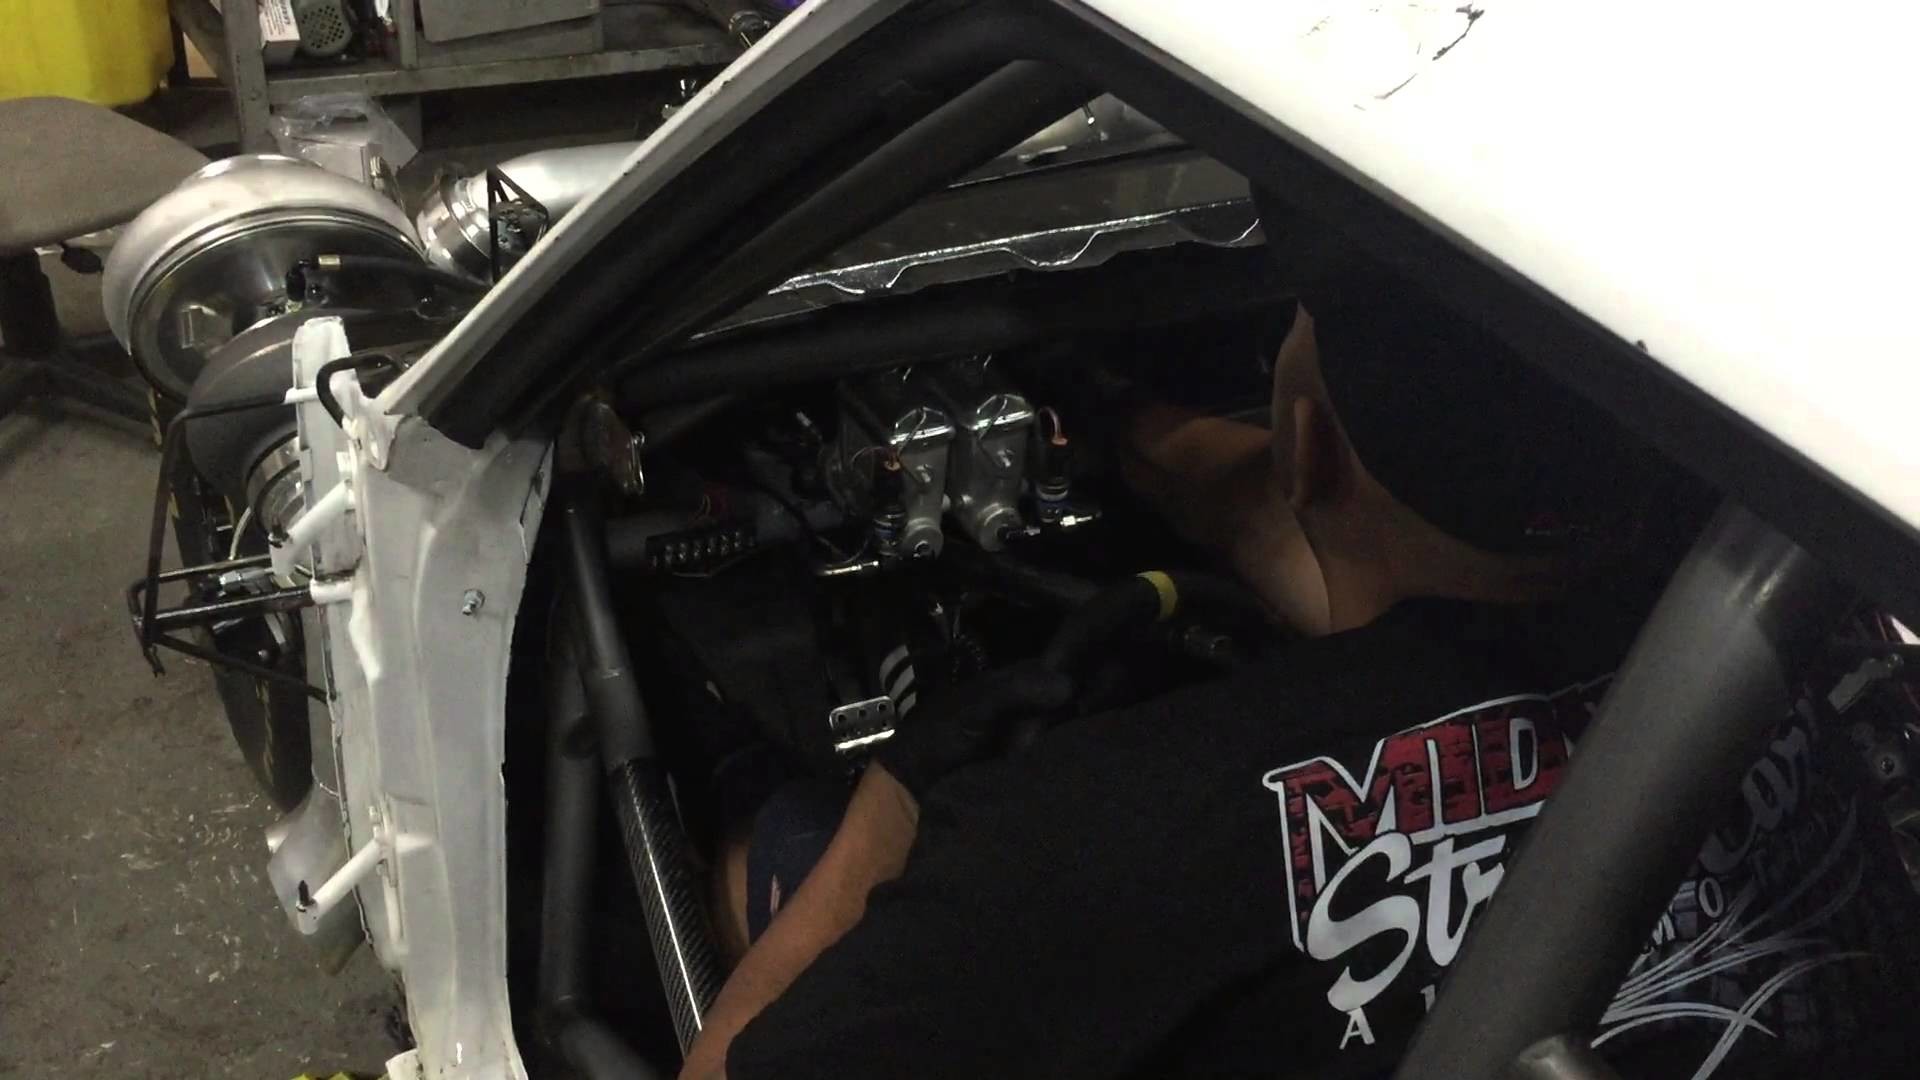 1920x1080 Big Chief From Street Outlaws Allows A Sneak Peak Into The Crow's Big  Rebuild!